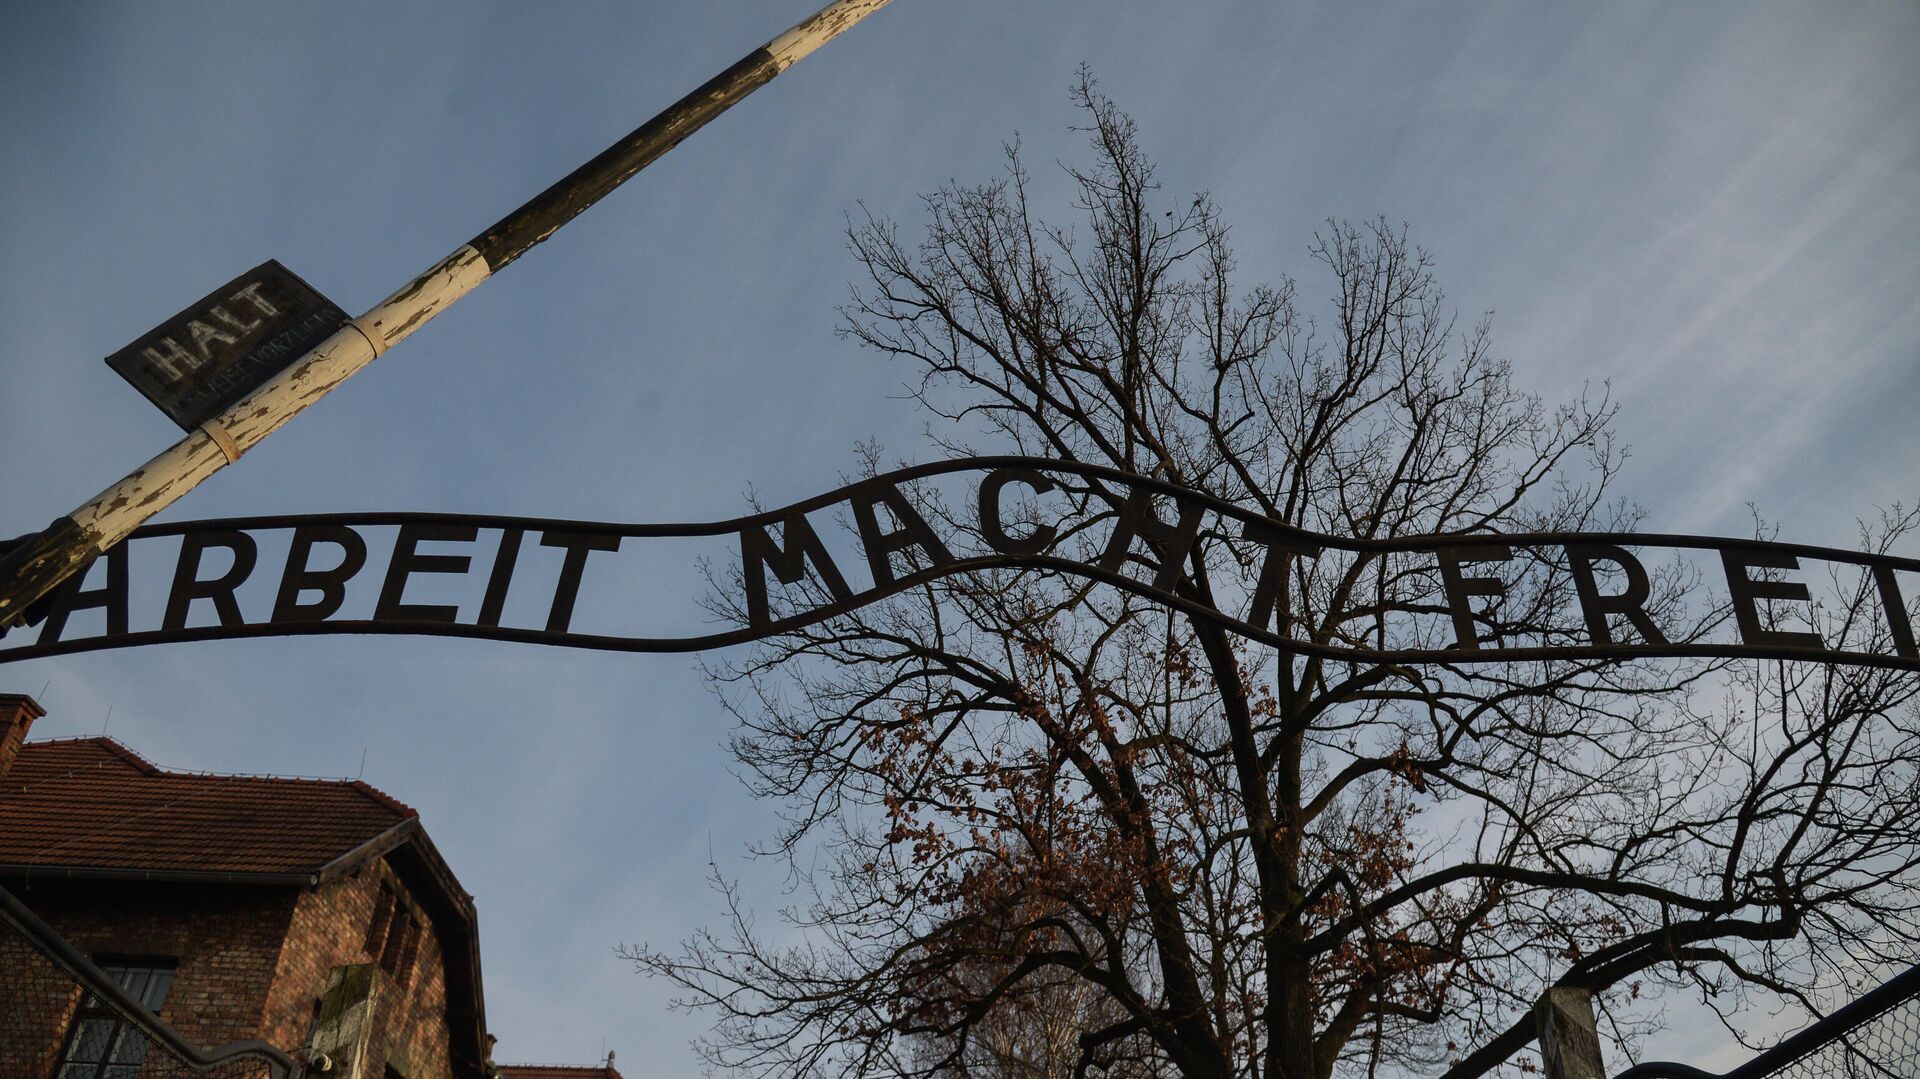 On the eve of Victory Day in Poland they decided to make money from Auschwitz.